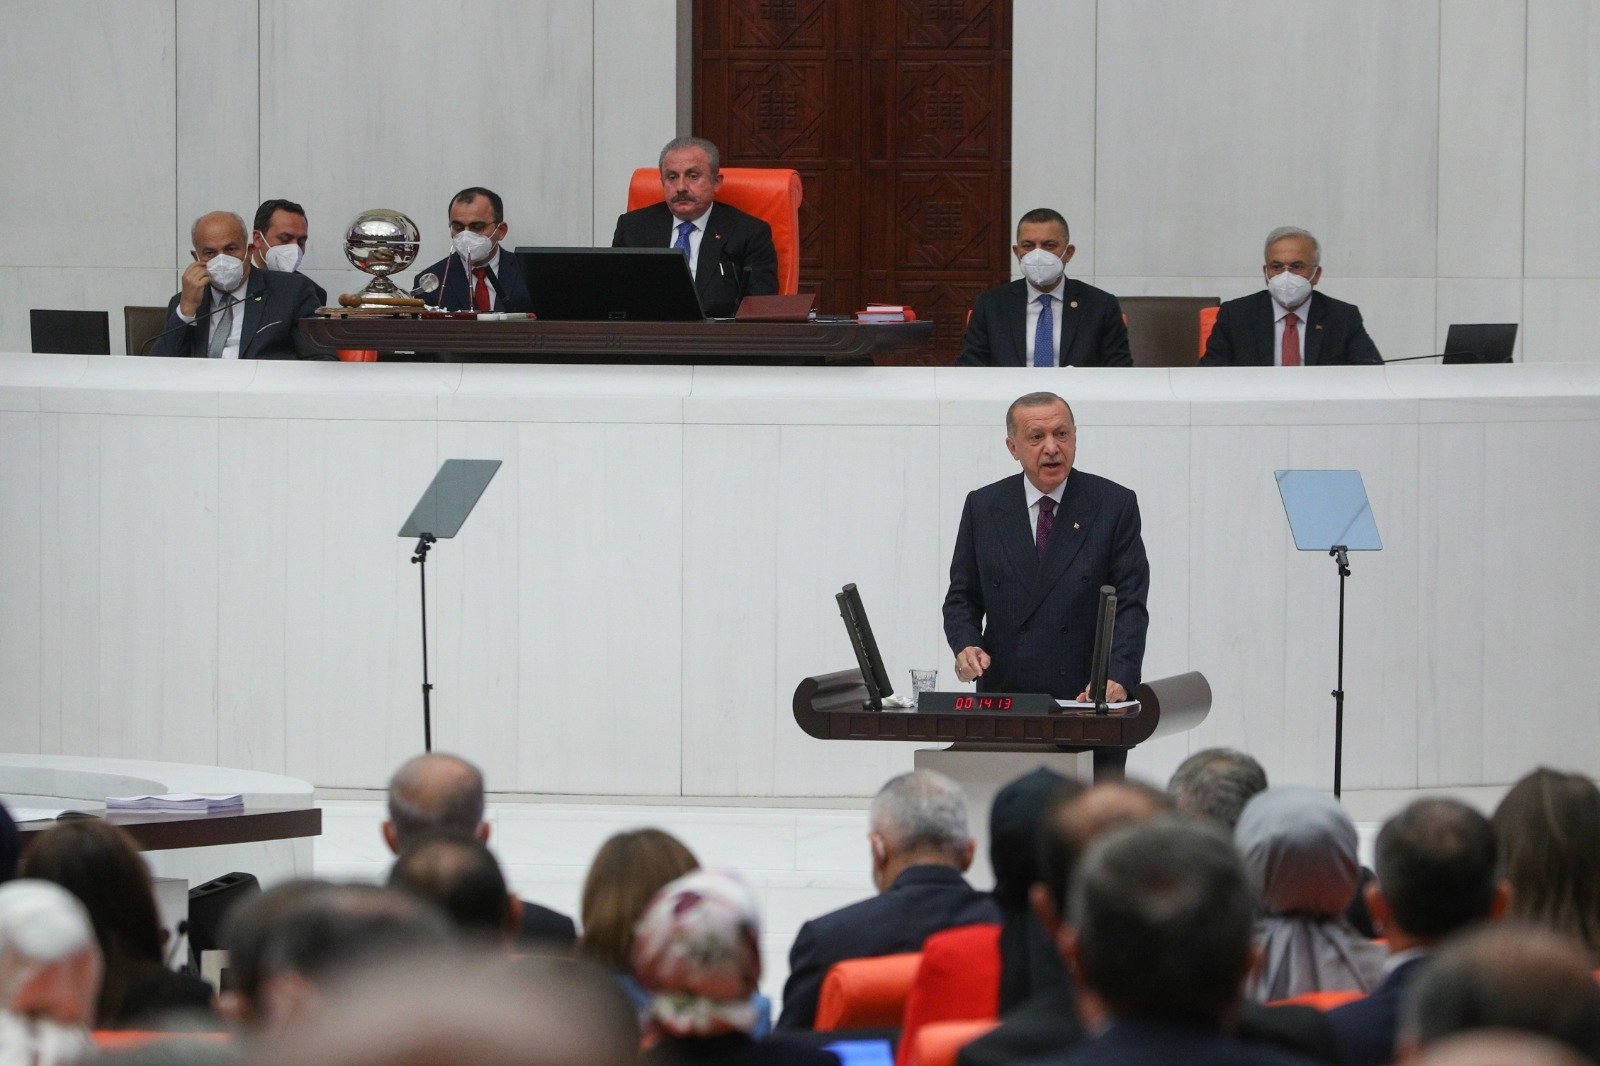 President Recep Tayyip Erdoğan made the opening speech at Parliament on the opening of the fifth legislative year of its 27th term of the Turkish Grand National Assembly (TBMM) in Ankara, Turkey, Oct. 1, 2021. (DHA Photo)